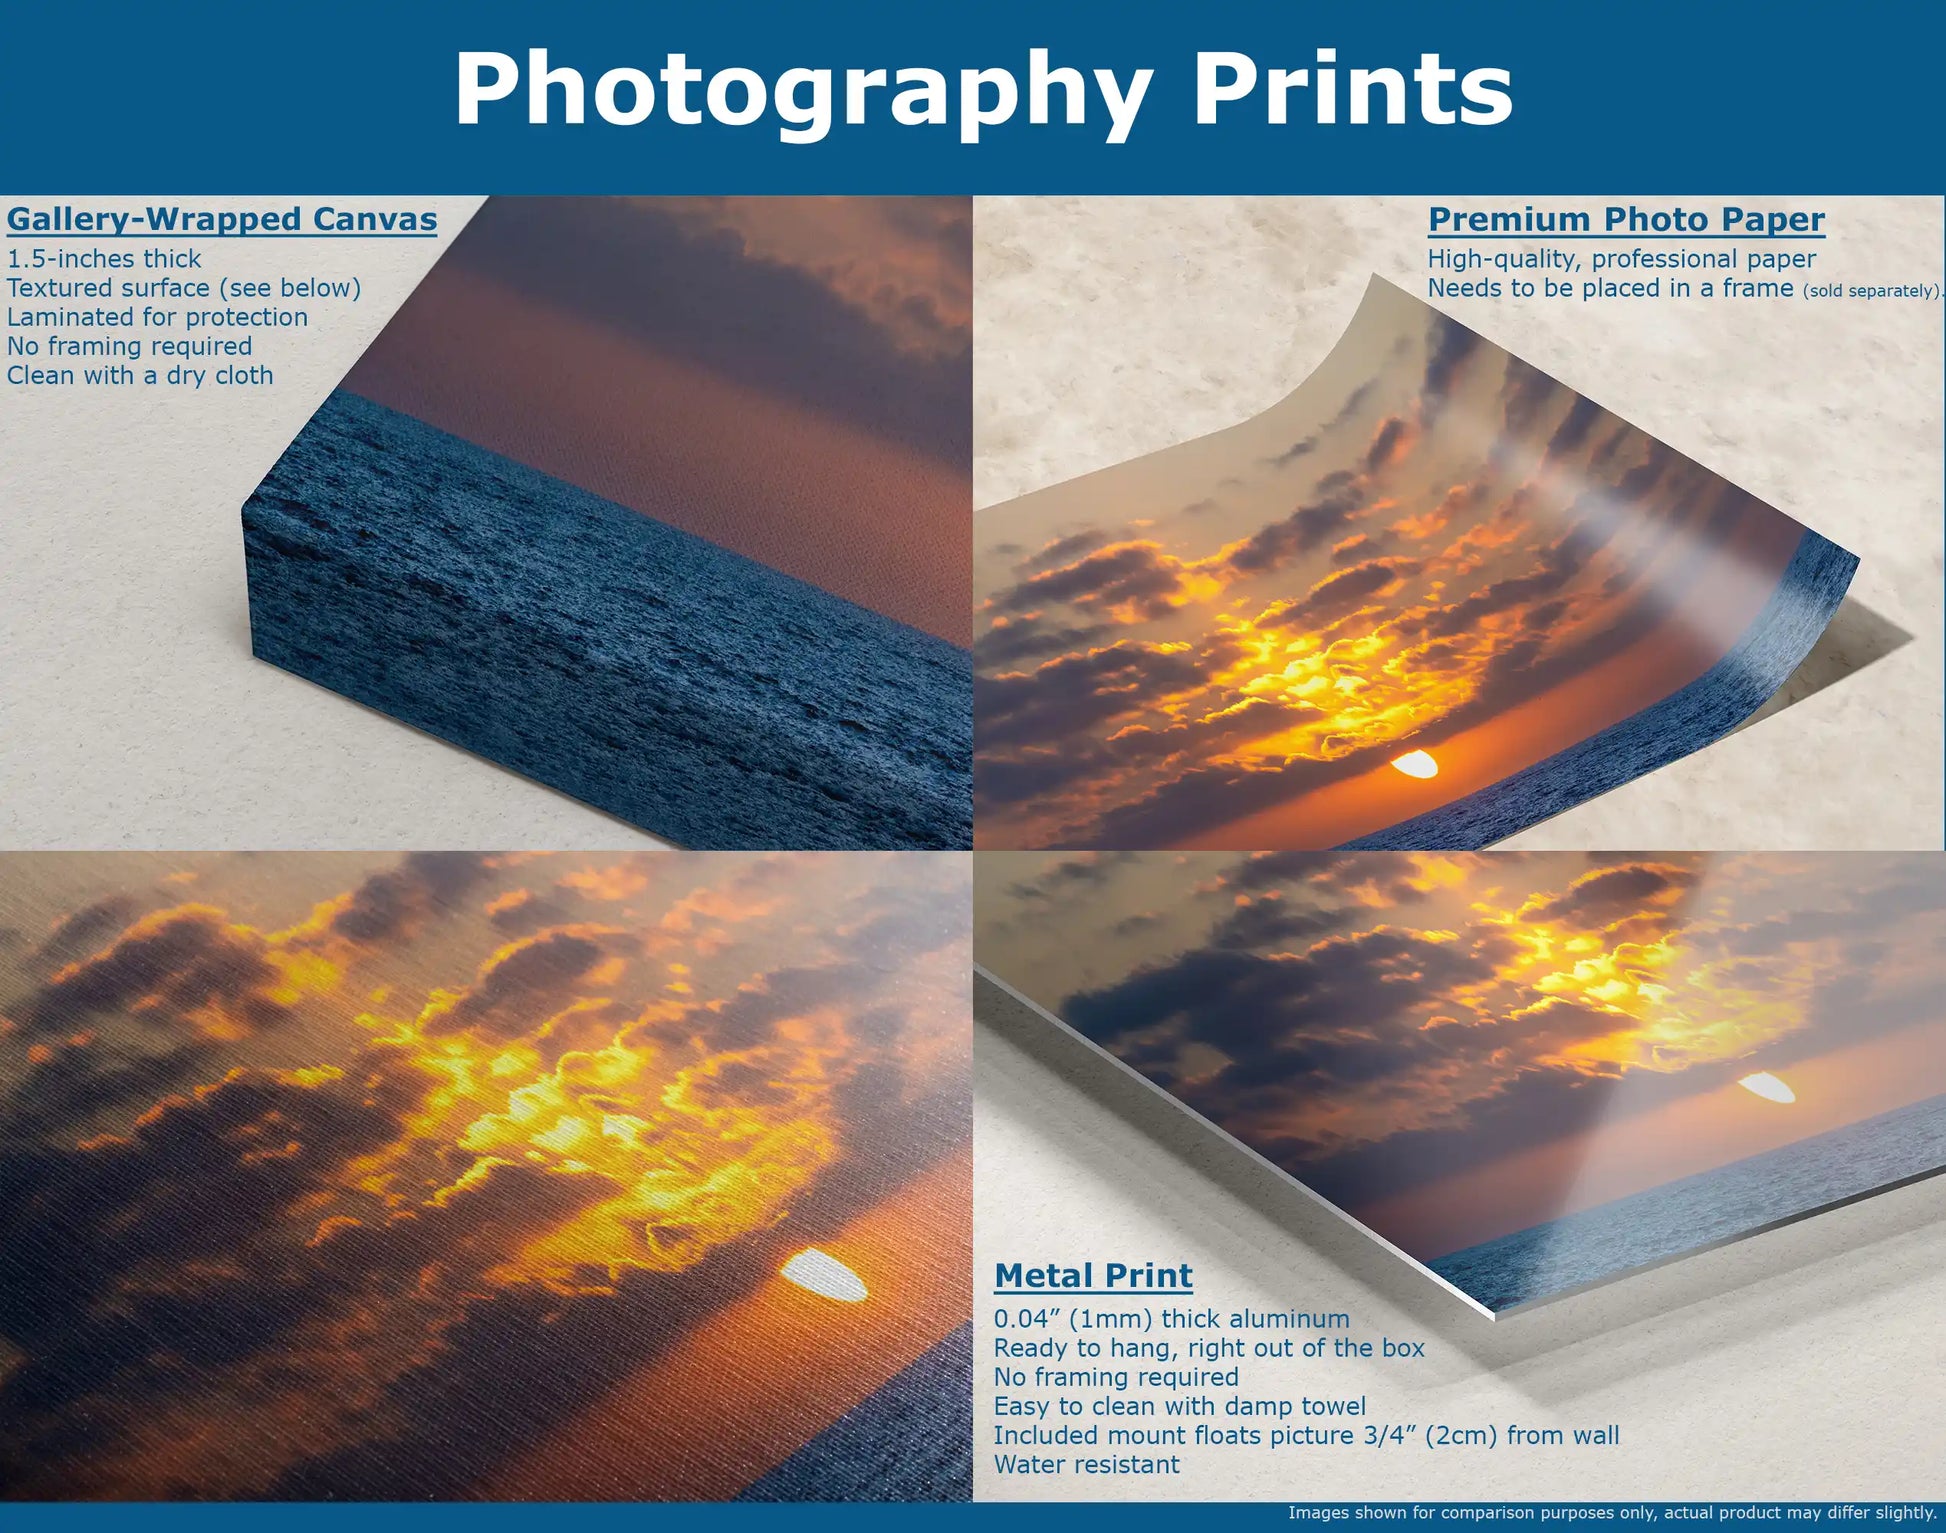 Comparison of photography prints on gallery-wrapped canvas, premium photo paper, and metal print featuring a sunset.